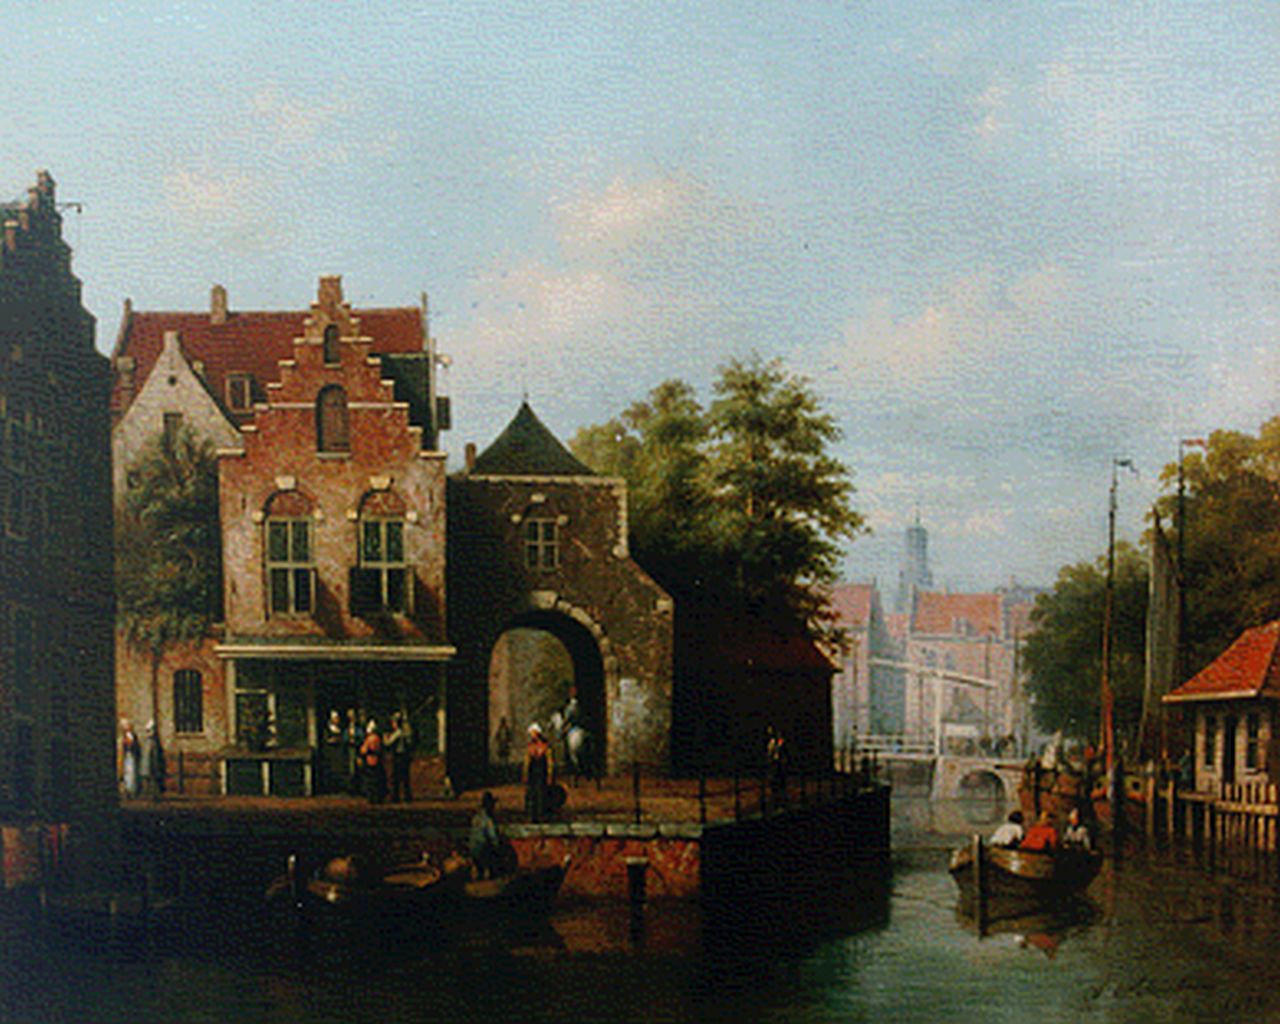 Scheerboom A.  | Andries Scheerboom, Daily activities in a Dutch town, oil on canvas 53.5 x 66.6 cm, signed l.r. and dated 1856